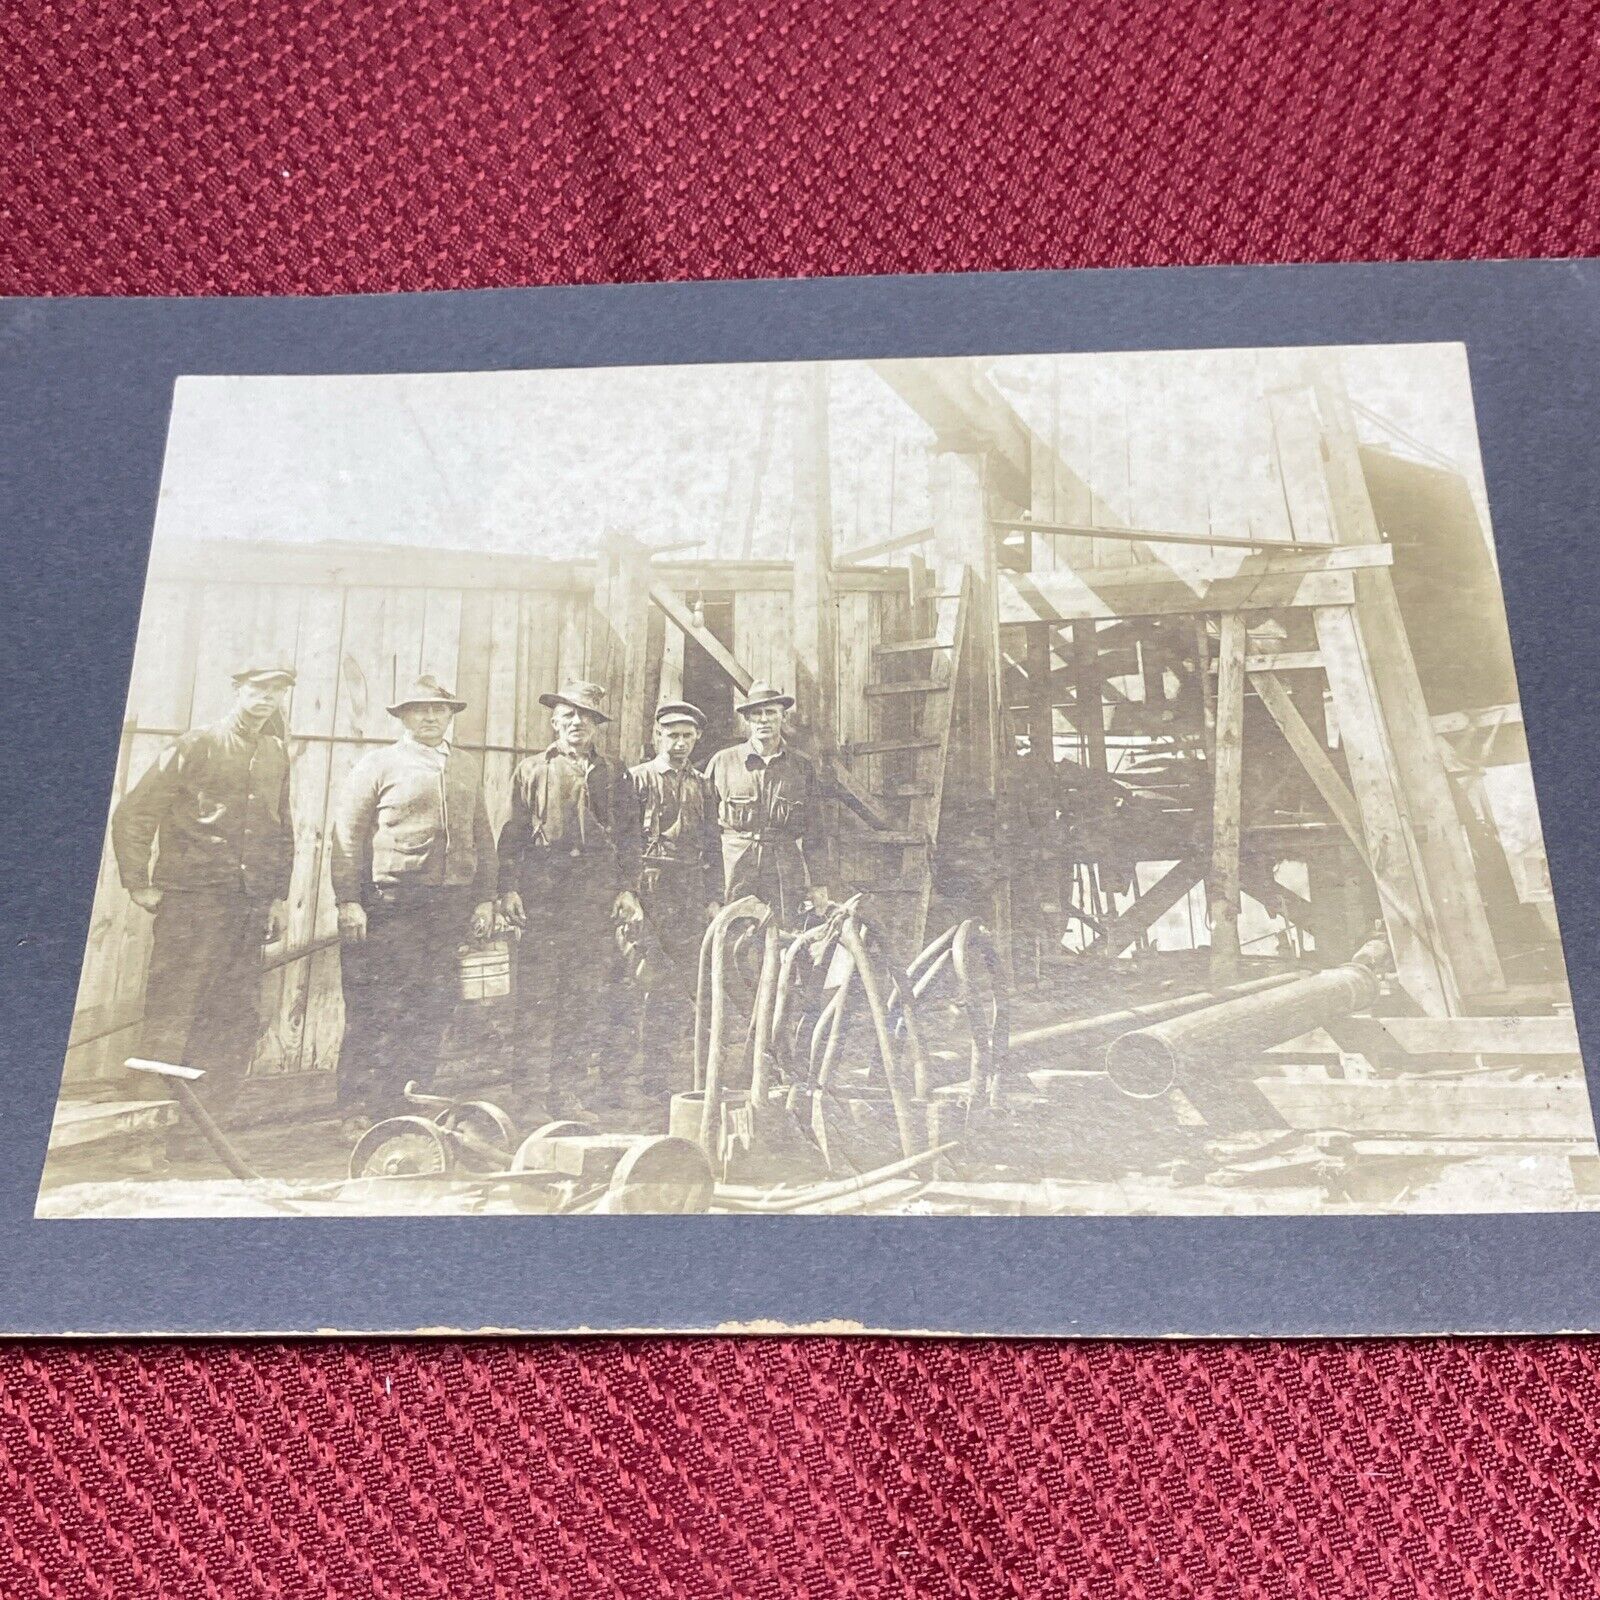 Drake Well Albumen 4x6 Print On card Stock.  Oil Well Drilling Rig. Late 1800’s